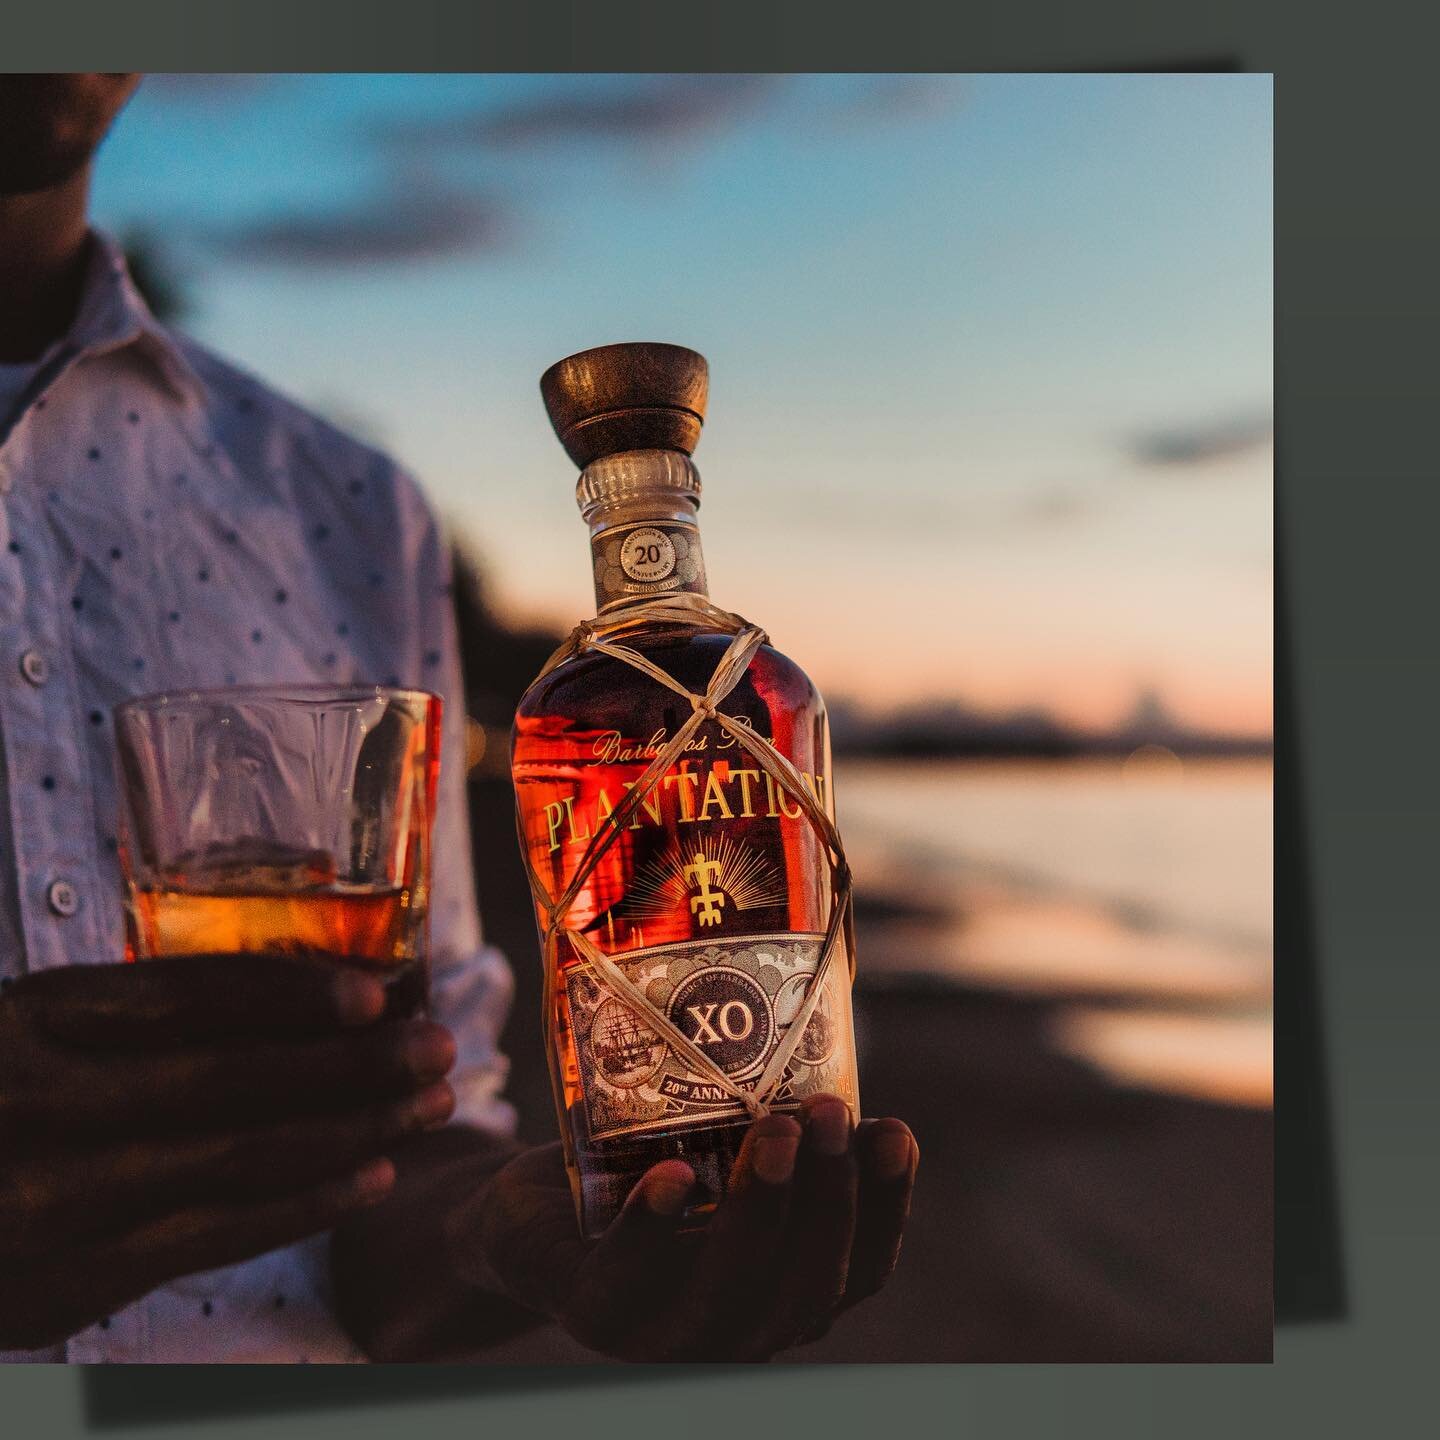 Today is the day we celebrate our magnificent &amp; strong father figures. ✨

Cheers to all those who nurtured their children as much as Maison Ferrand nurtures their rum. 🥃

🇭 🇦 🇵 🇵 🇾  🇫 🇦 🇹 🇭 🇪 🇷 🇸  🇩 🇦 🇾 

#fathersday #celebrate #f